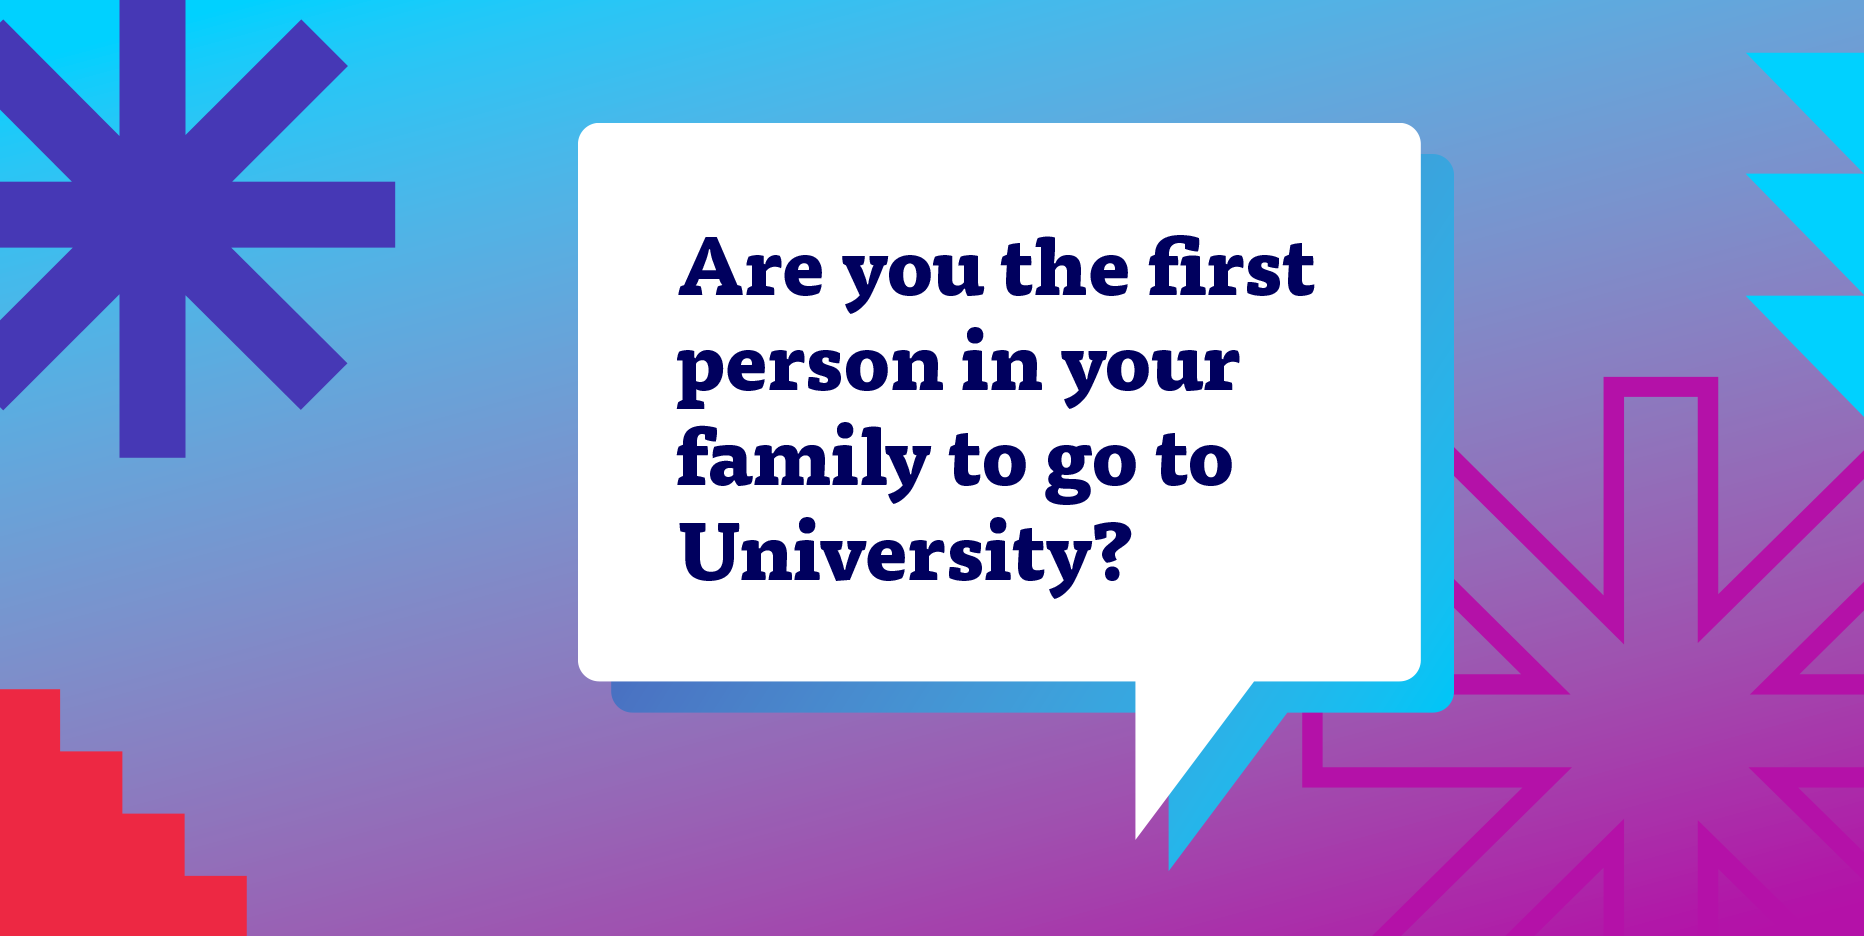 First in your family to come to Uni?